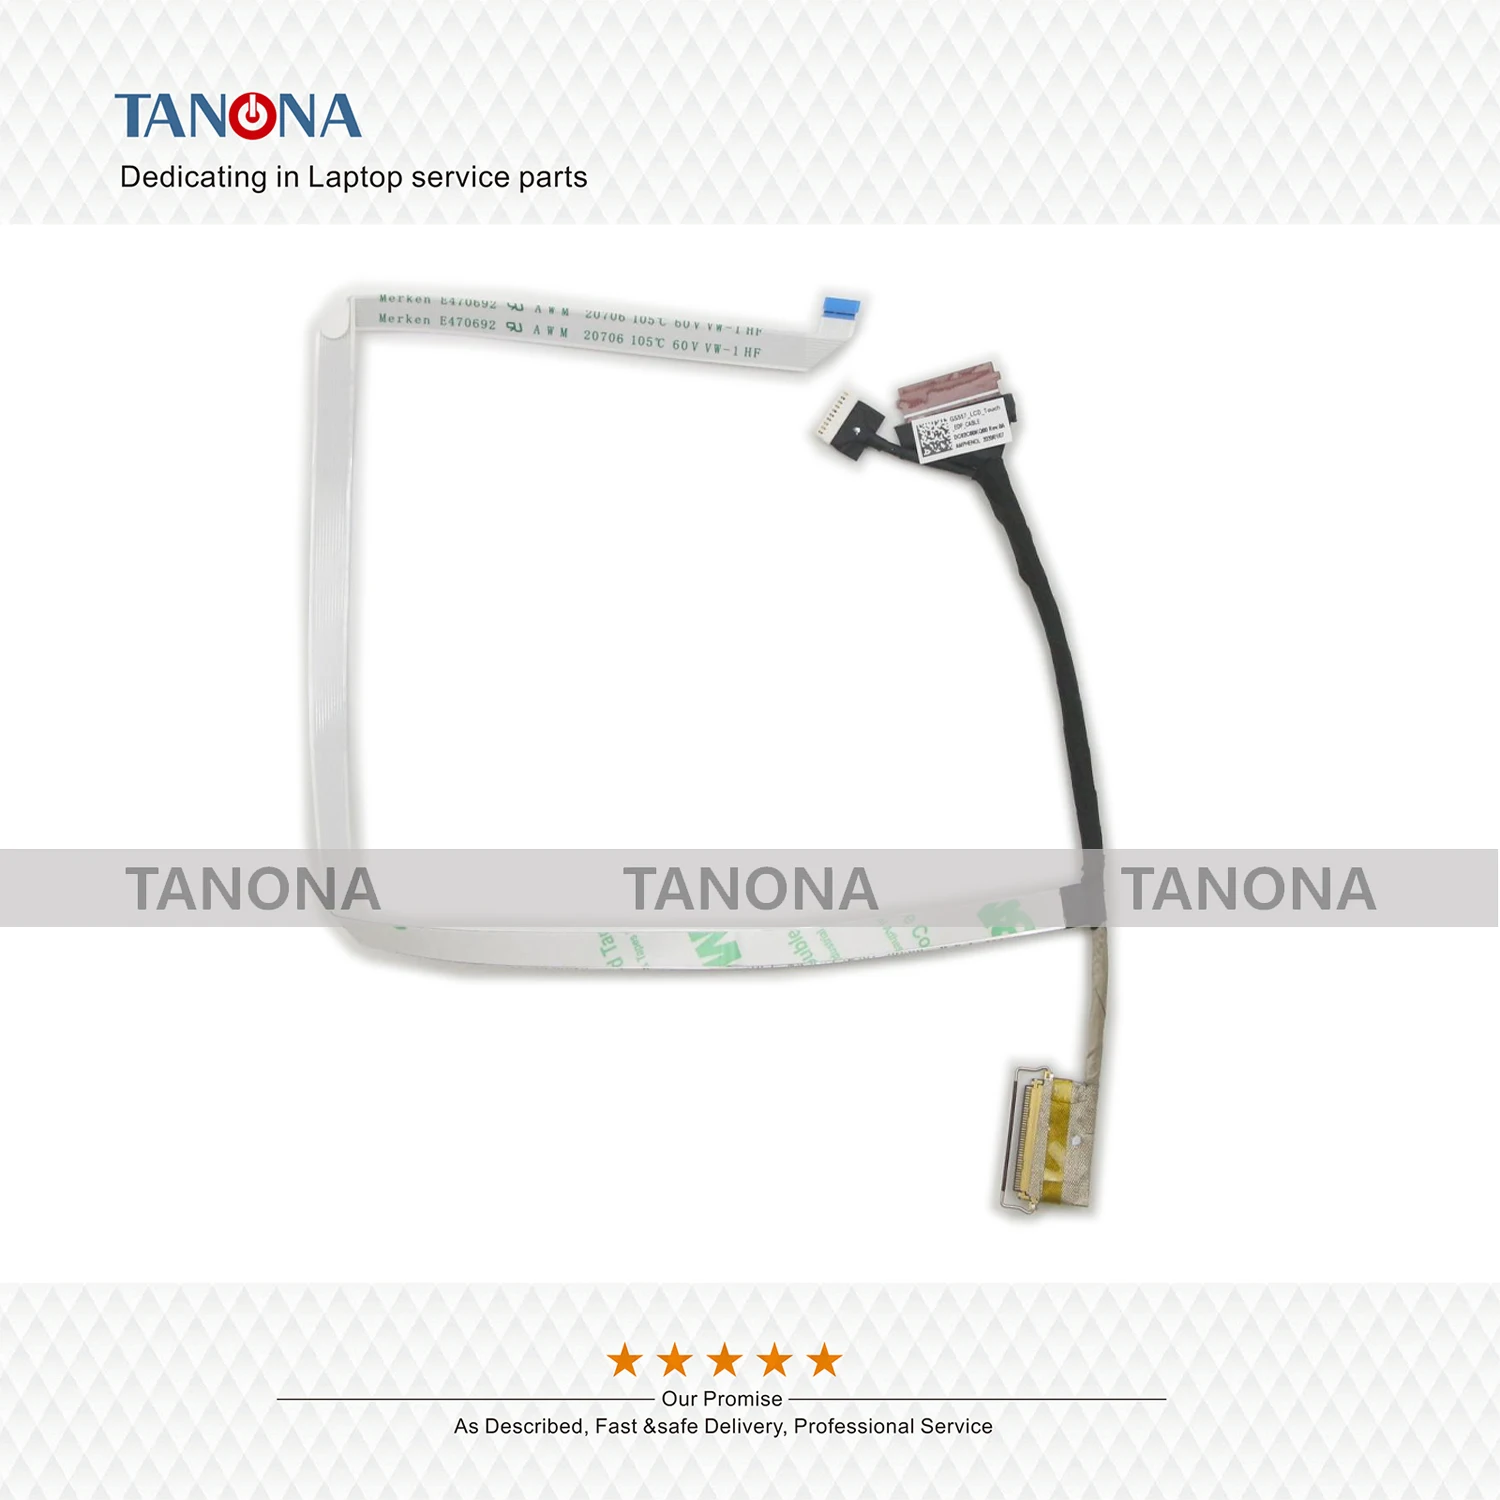 5-15ITL05 82FG ZAHARA GS557 LCD eDP Screen Video Cable 5-15ALC05 81YQ 82LN DC02C00KR10 5C10S30160 Non Touch 30pin for Lenovo 5-15IIL05 IdeaPad 5-15ARE05 